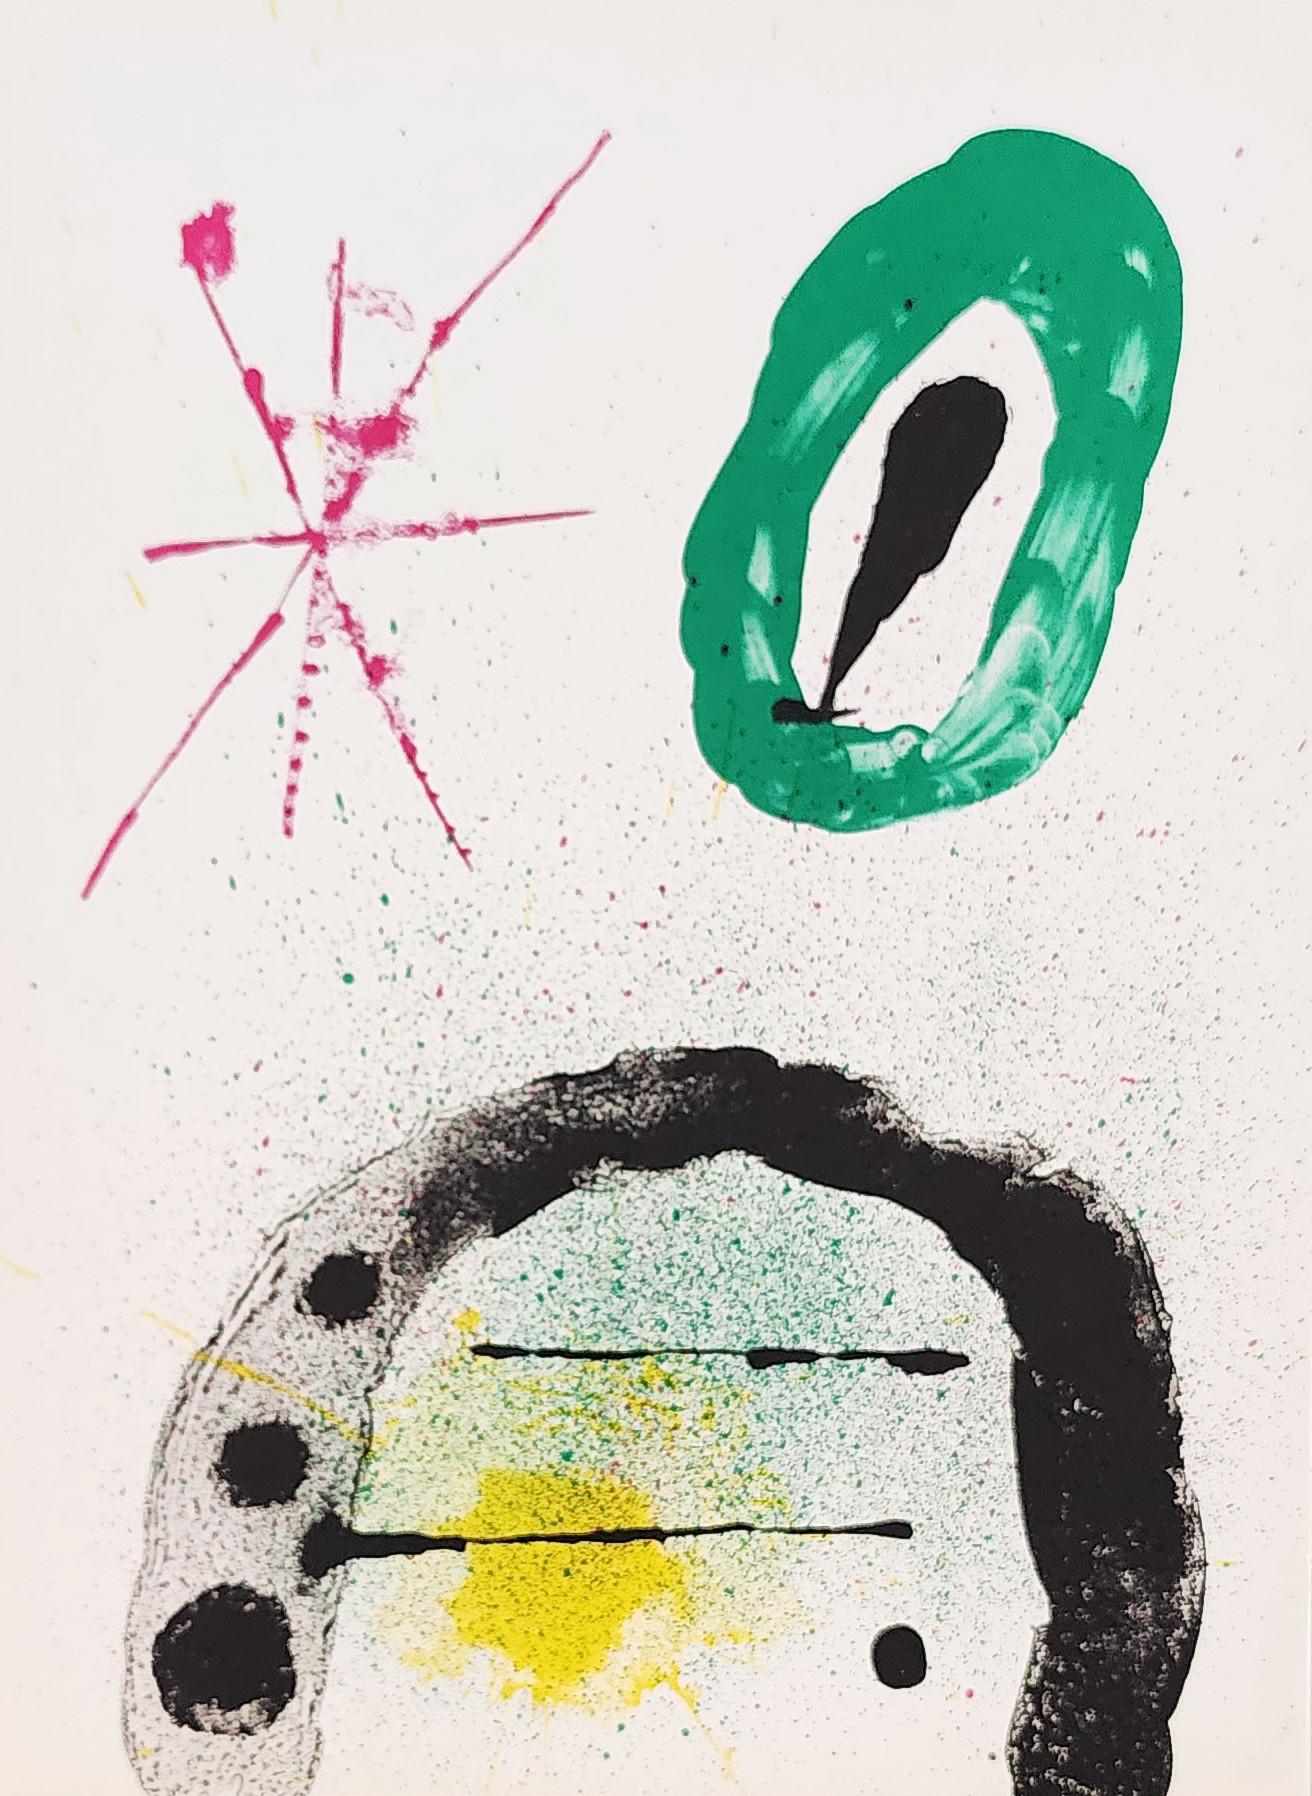 La Fille Du Jardinier (from Artigas) (Abstract Expressionism, Surrealism, Star) - Print by Joan Miró